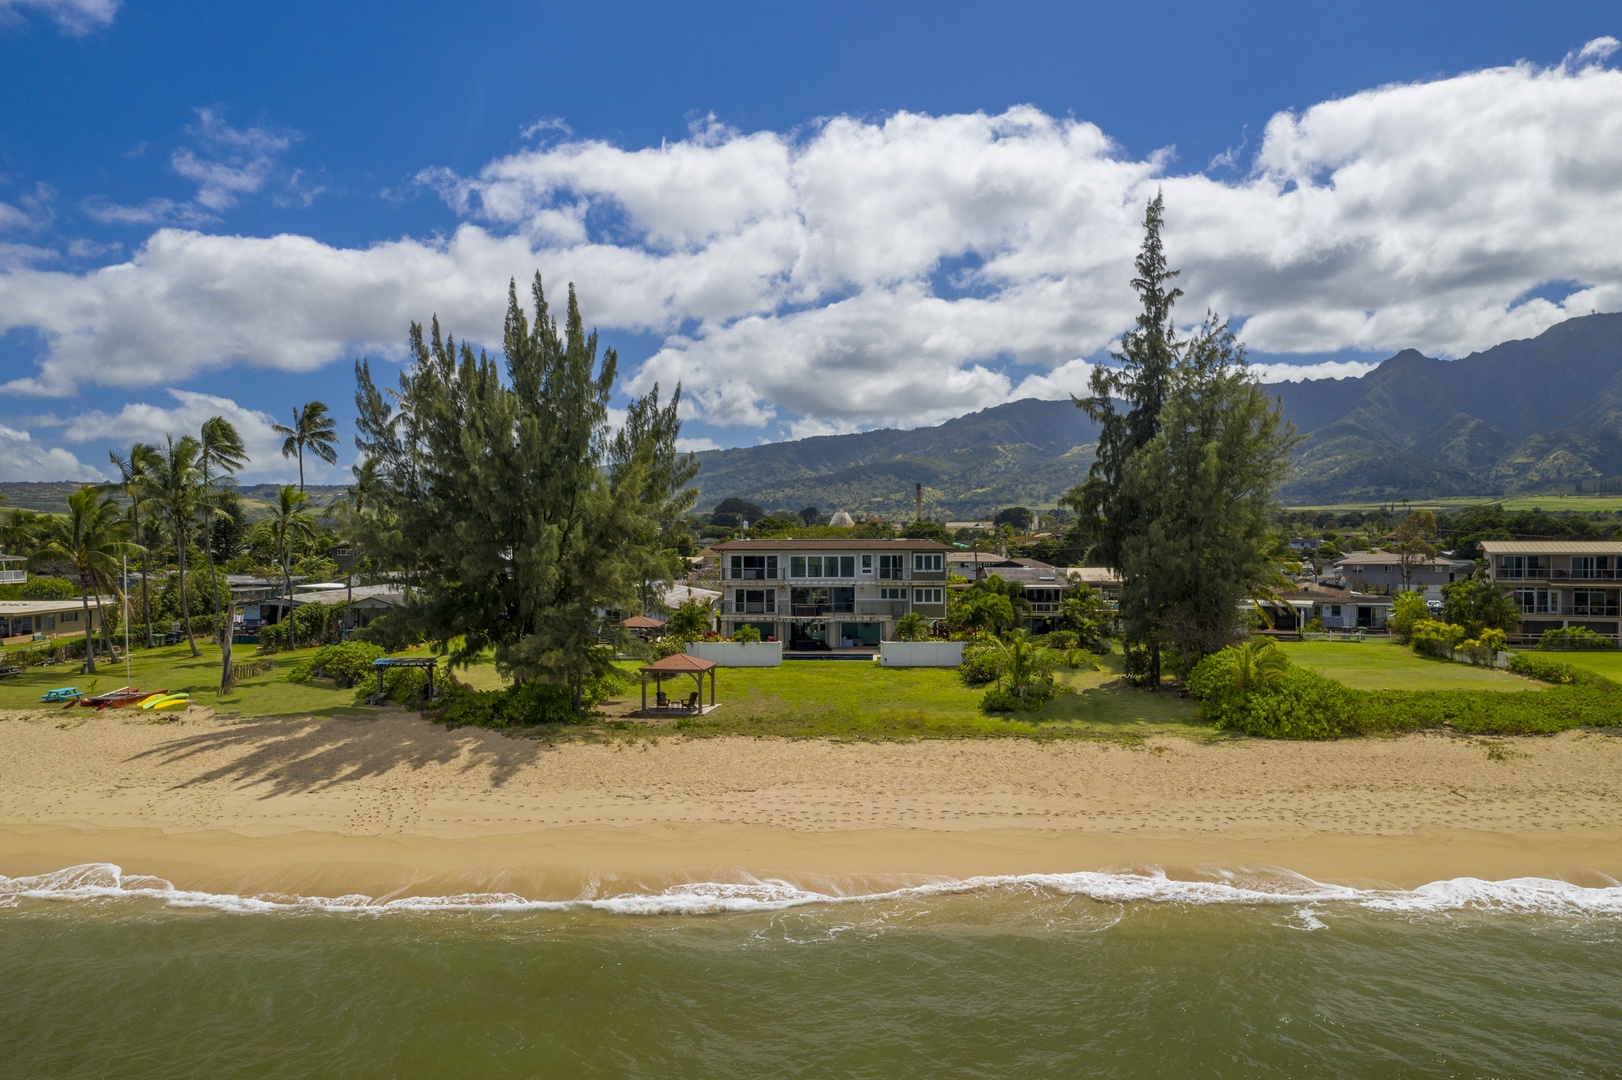 Waialua Vacation Rentals, Kala'iku Estate - A short drive from the home leads to attractions like the Waimea Valley hike/Waimea Falls, Dole Plantation, a renowned luau at the Polynesian Cultural Center, and golf at Turtle Bay Resort